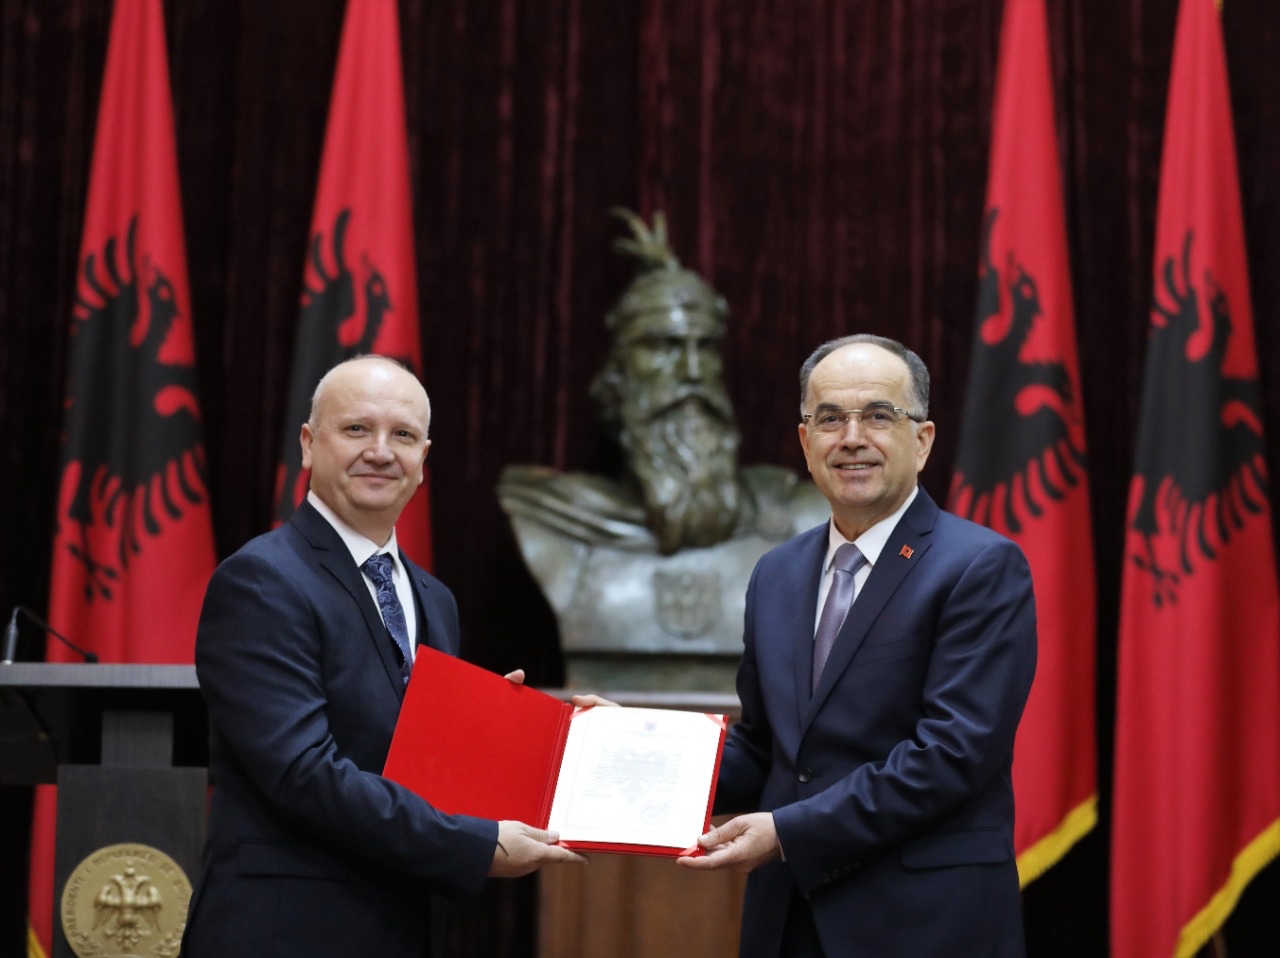 The President of the Republic of Albania, H.E. Mr. Bajram Begaj conferred the “Great Master”  award to the well-known artist Sokol Marsi